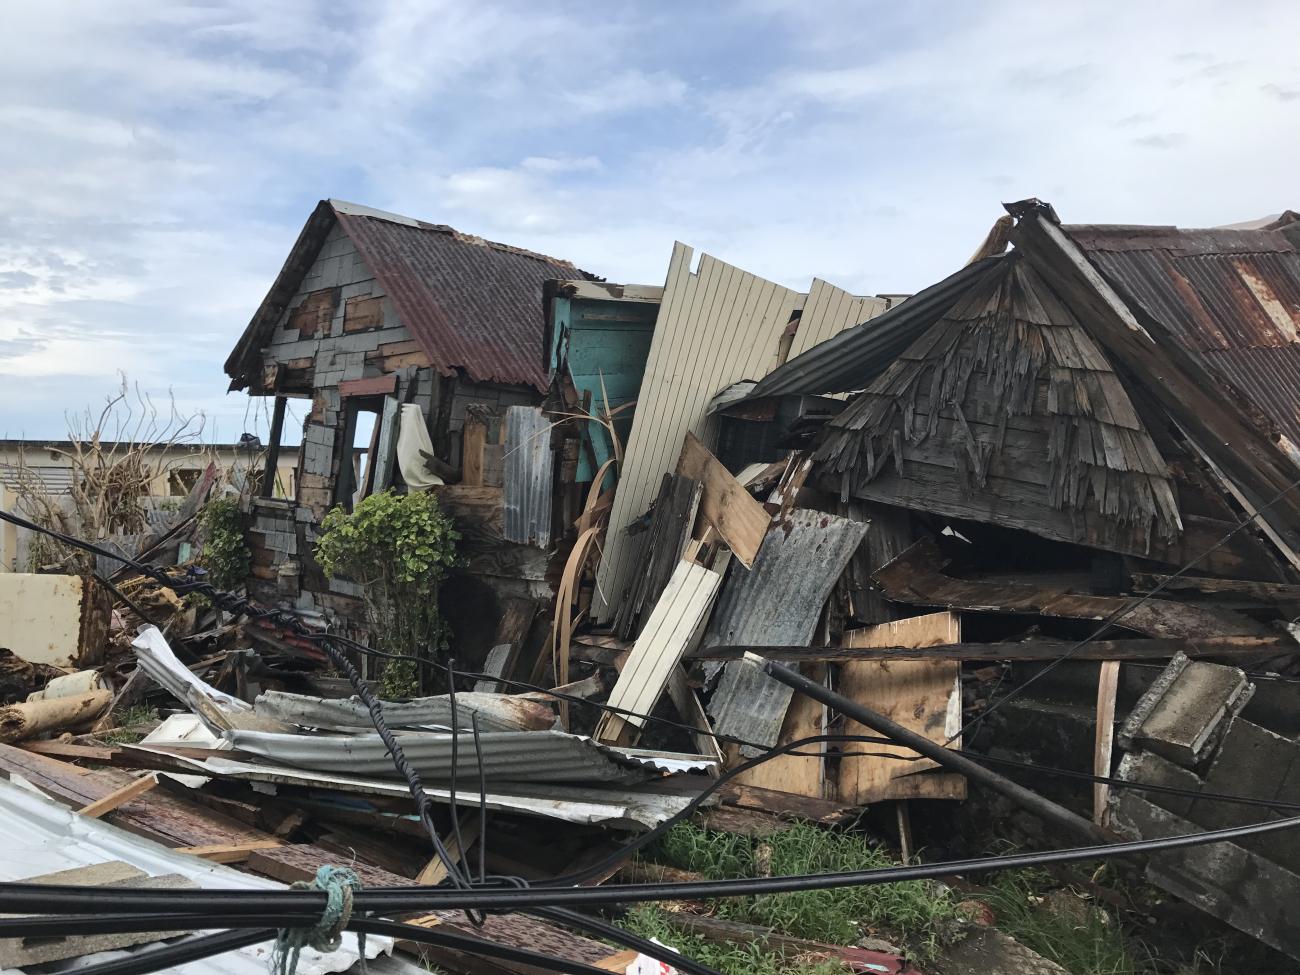 destroyed wooden house, loose materials, and wires from natural disaster